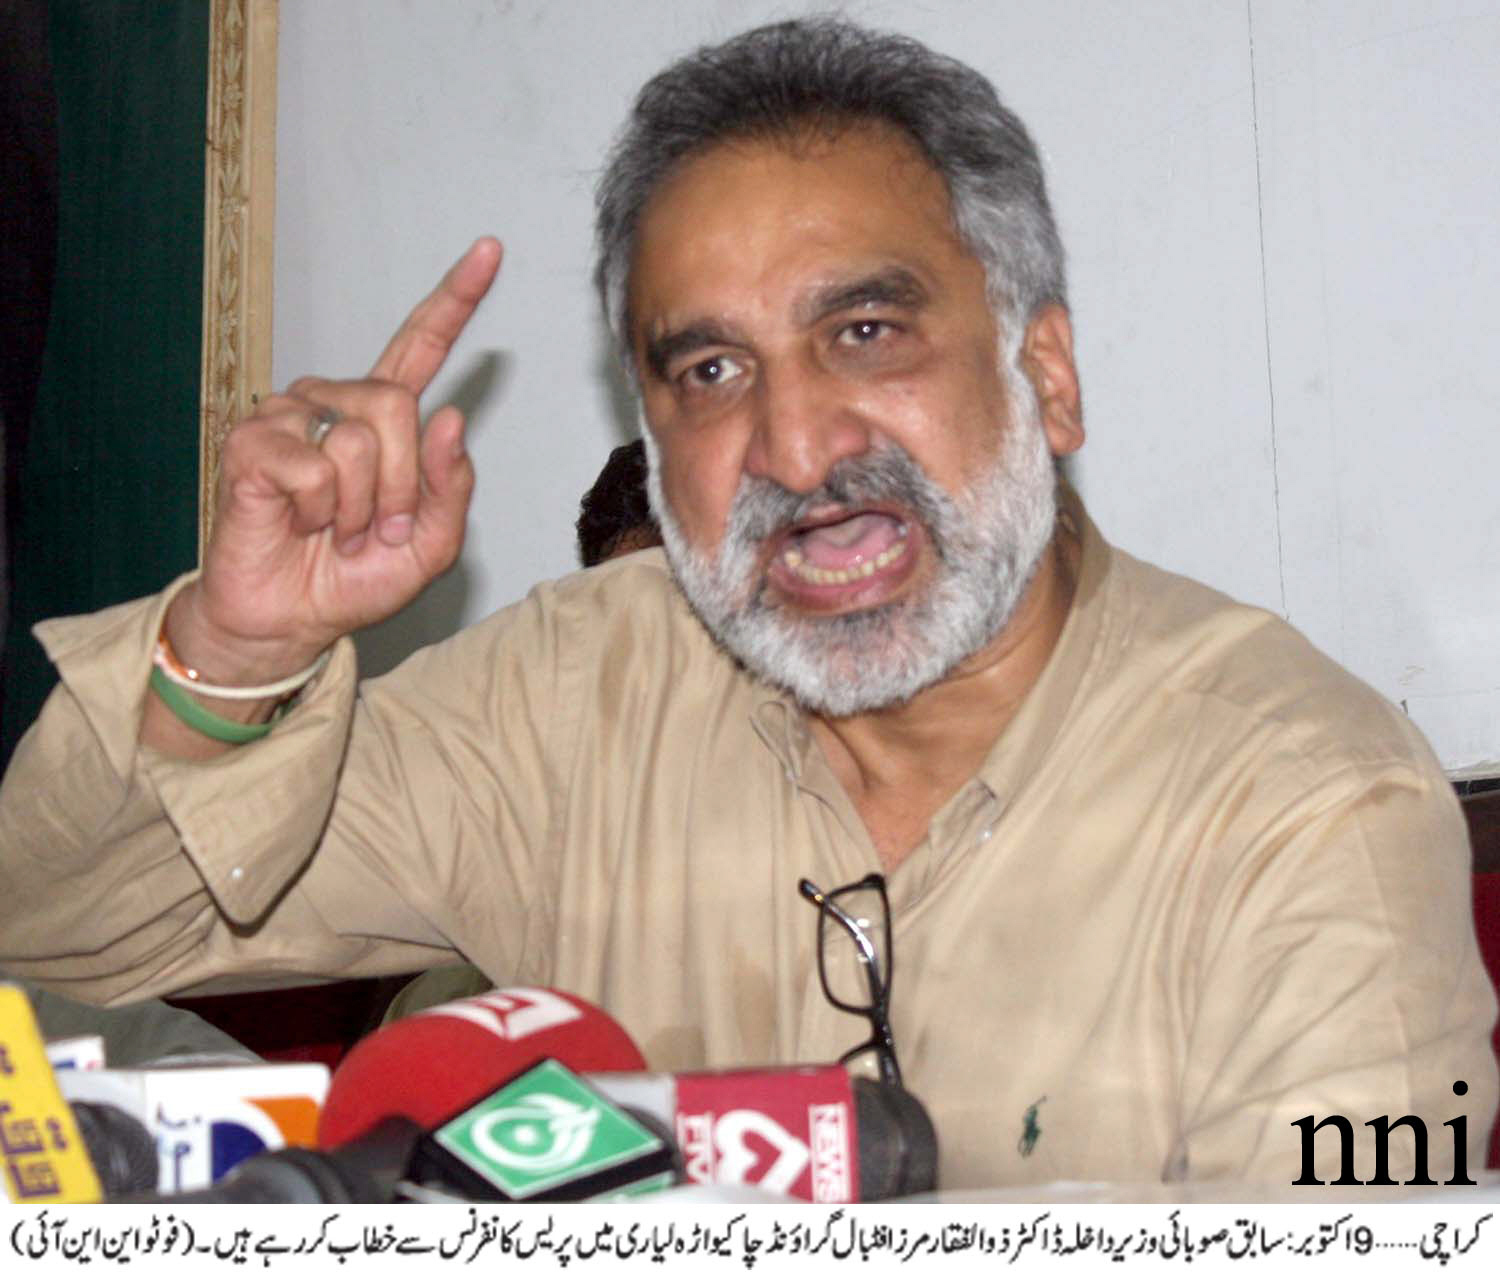 mirza family to contest on five seats in badin